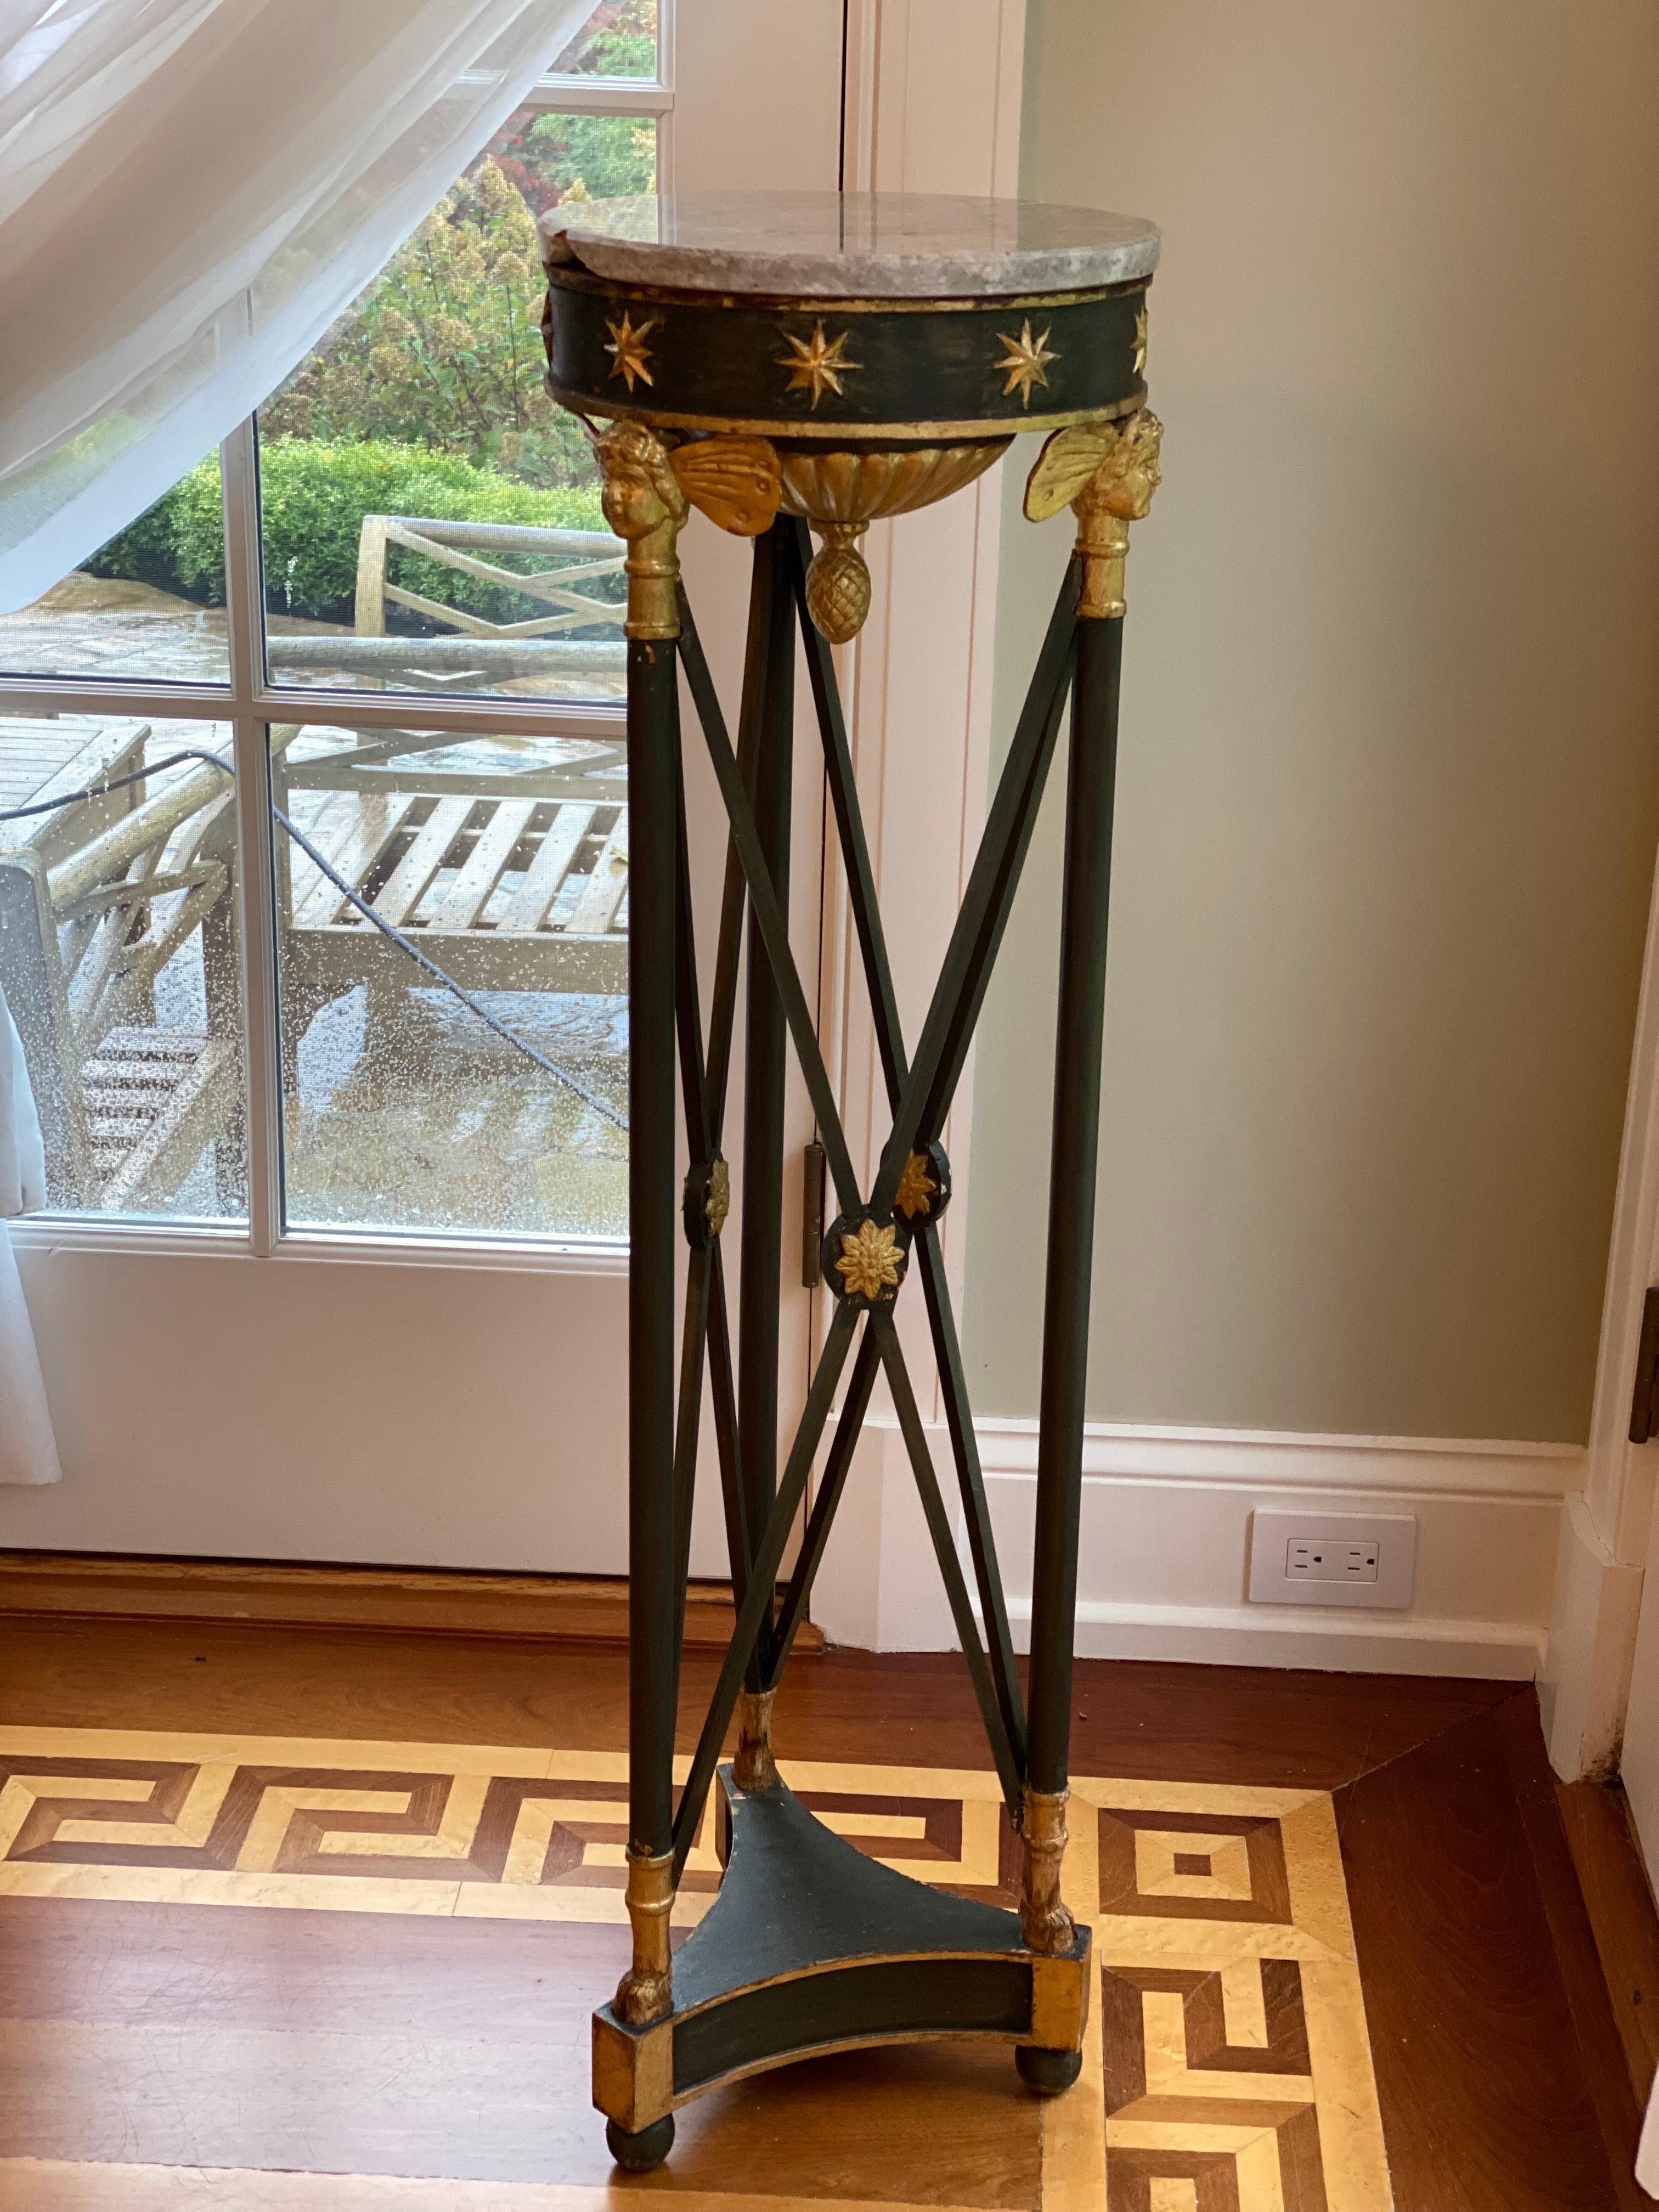 19th Century French empire green painted & giltwood pedestal.
Beautifully carved gilded stars, faces, rosettes, and architectural details on this green painted wood French pedestal. A beautiful piece that could use a new piece of marble or used